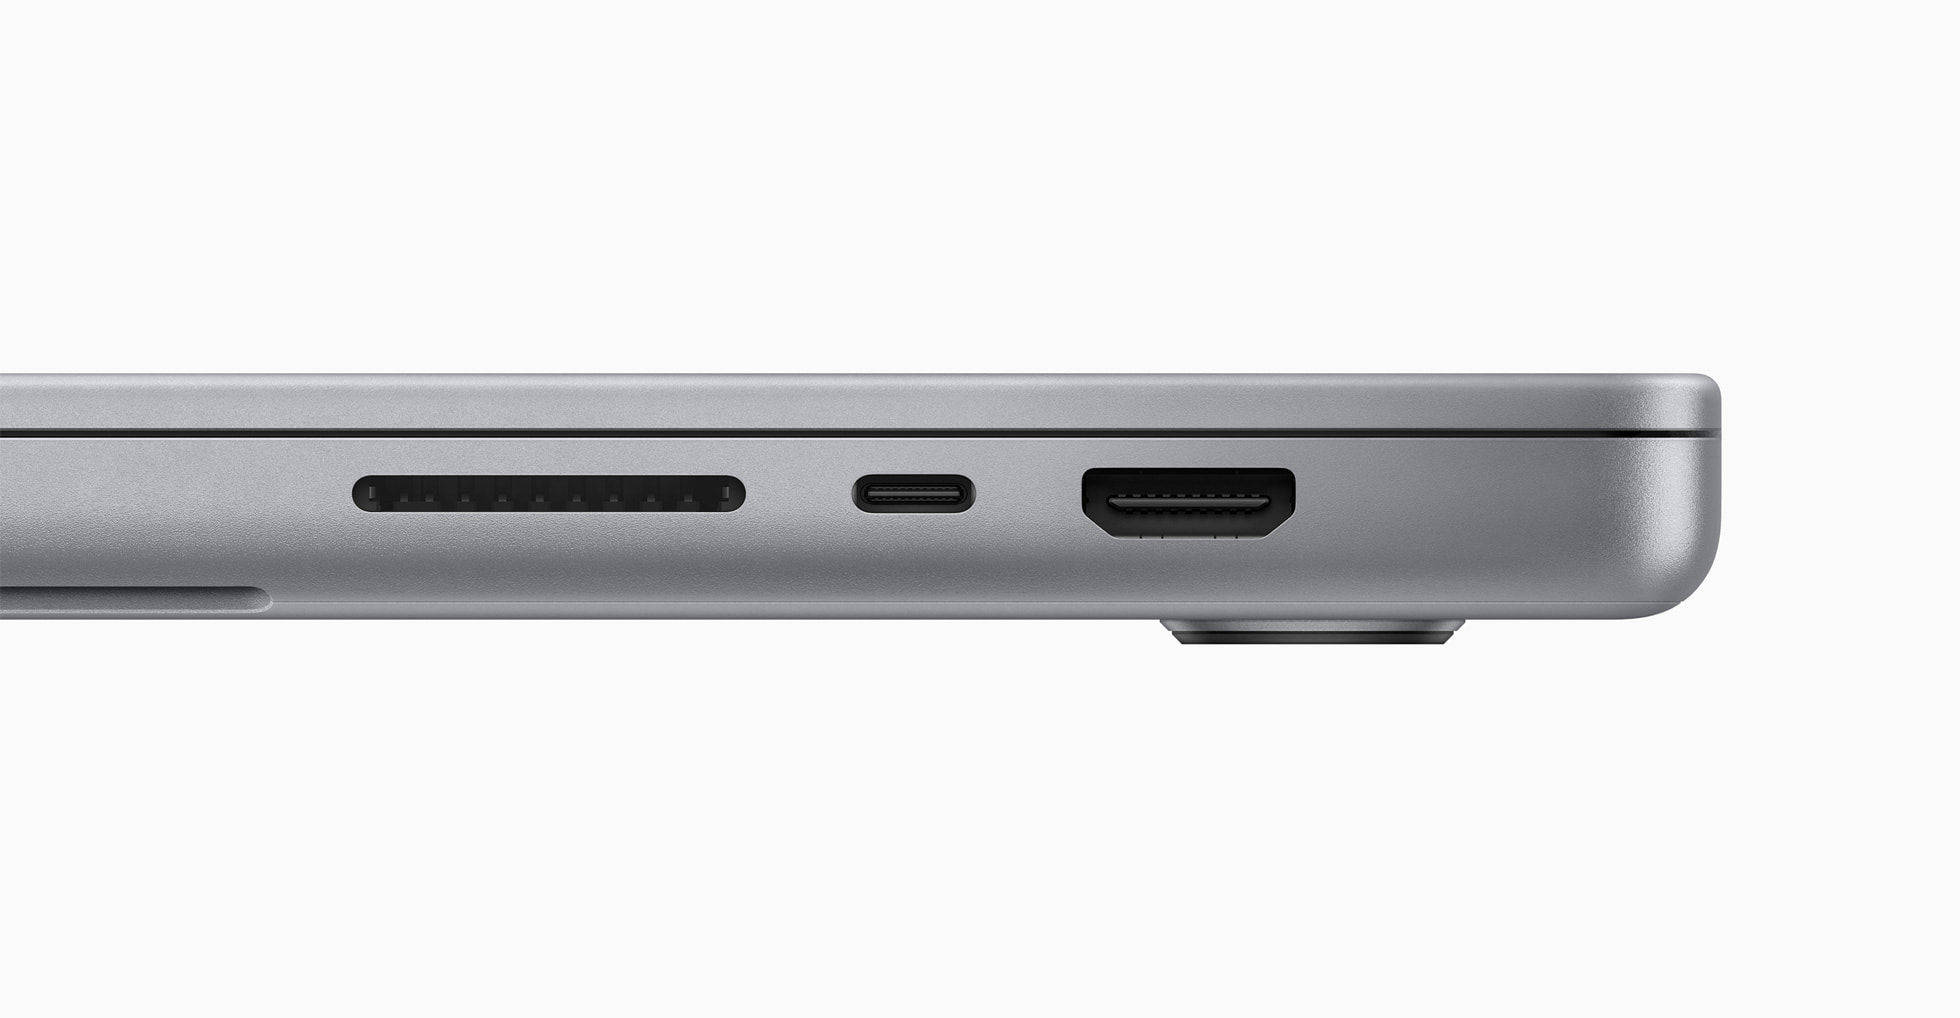 An SDXC card slot, Thunderbolt 4 port, and HDMI port are shown on MacBook Pro.